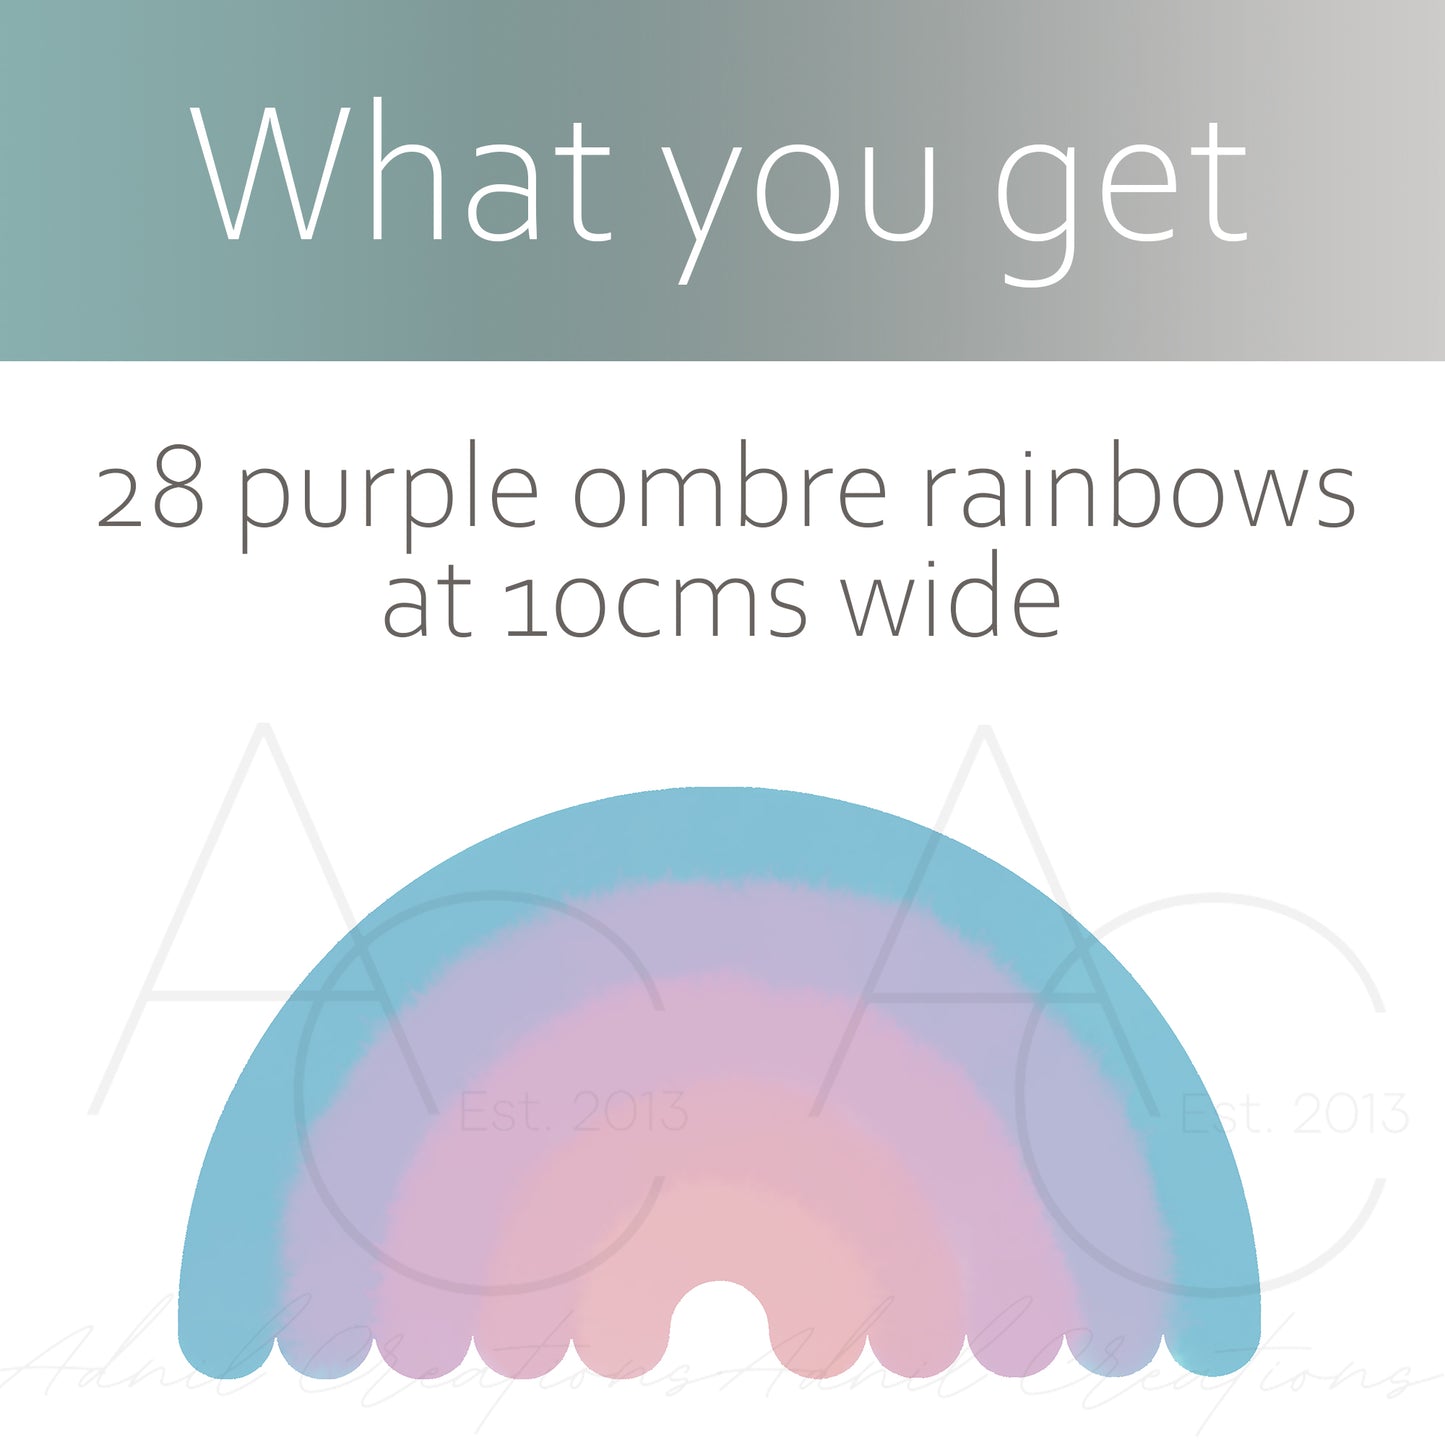 Purple ombre rainbows | Fabric wall stickers